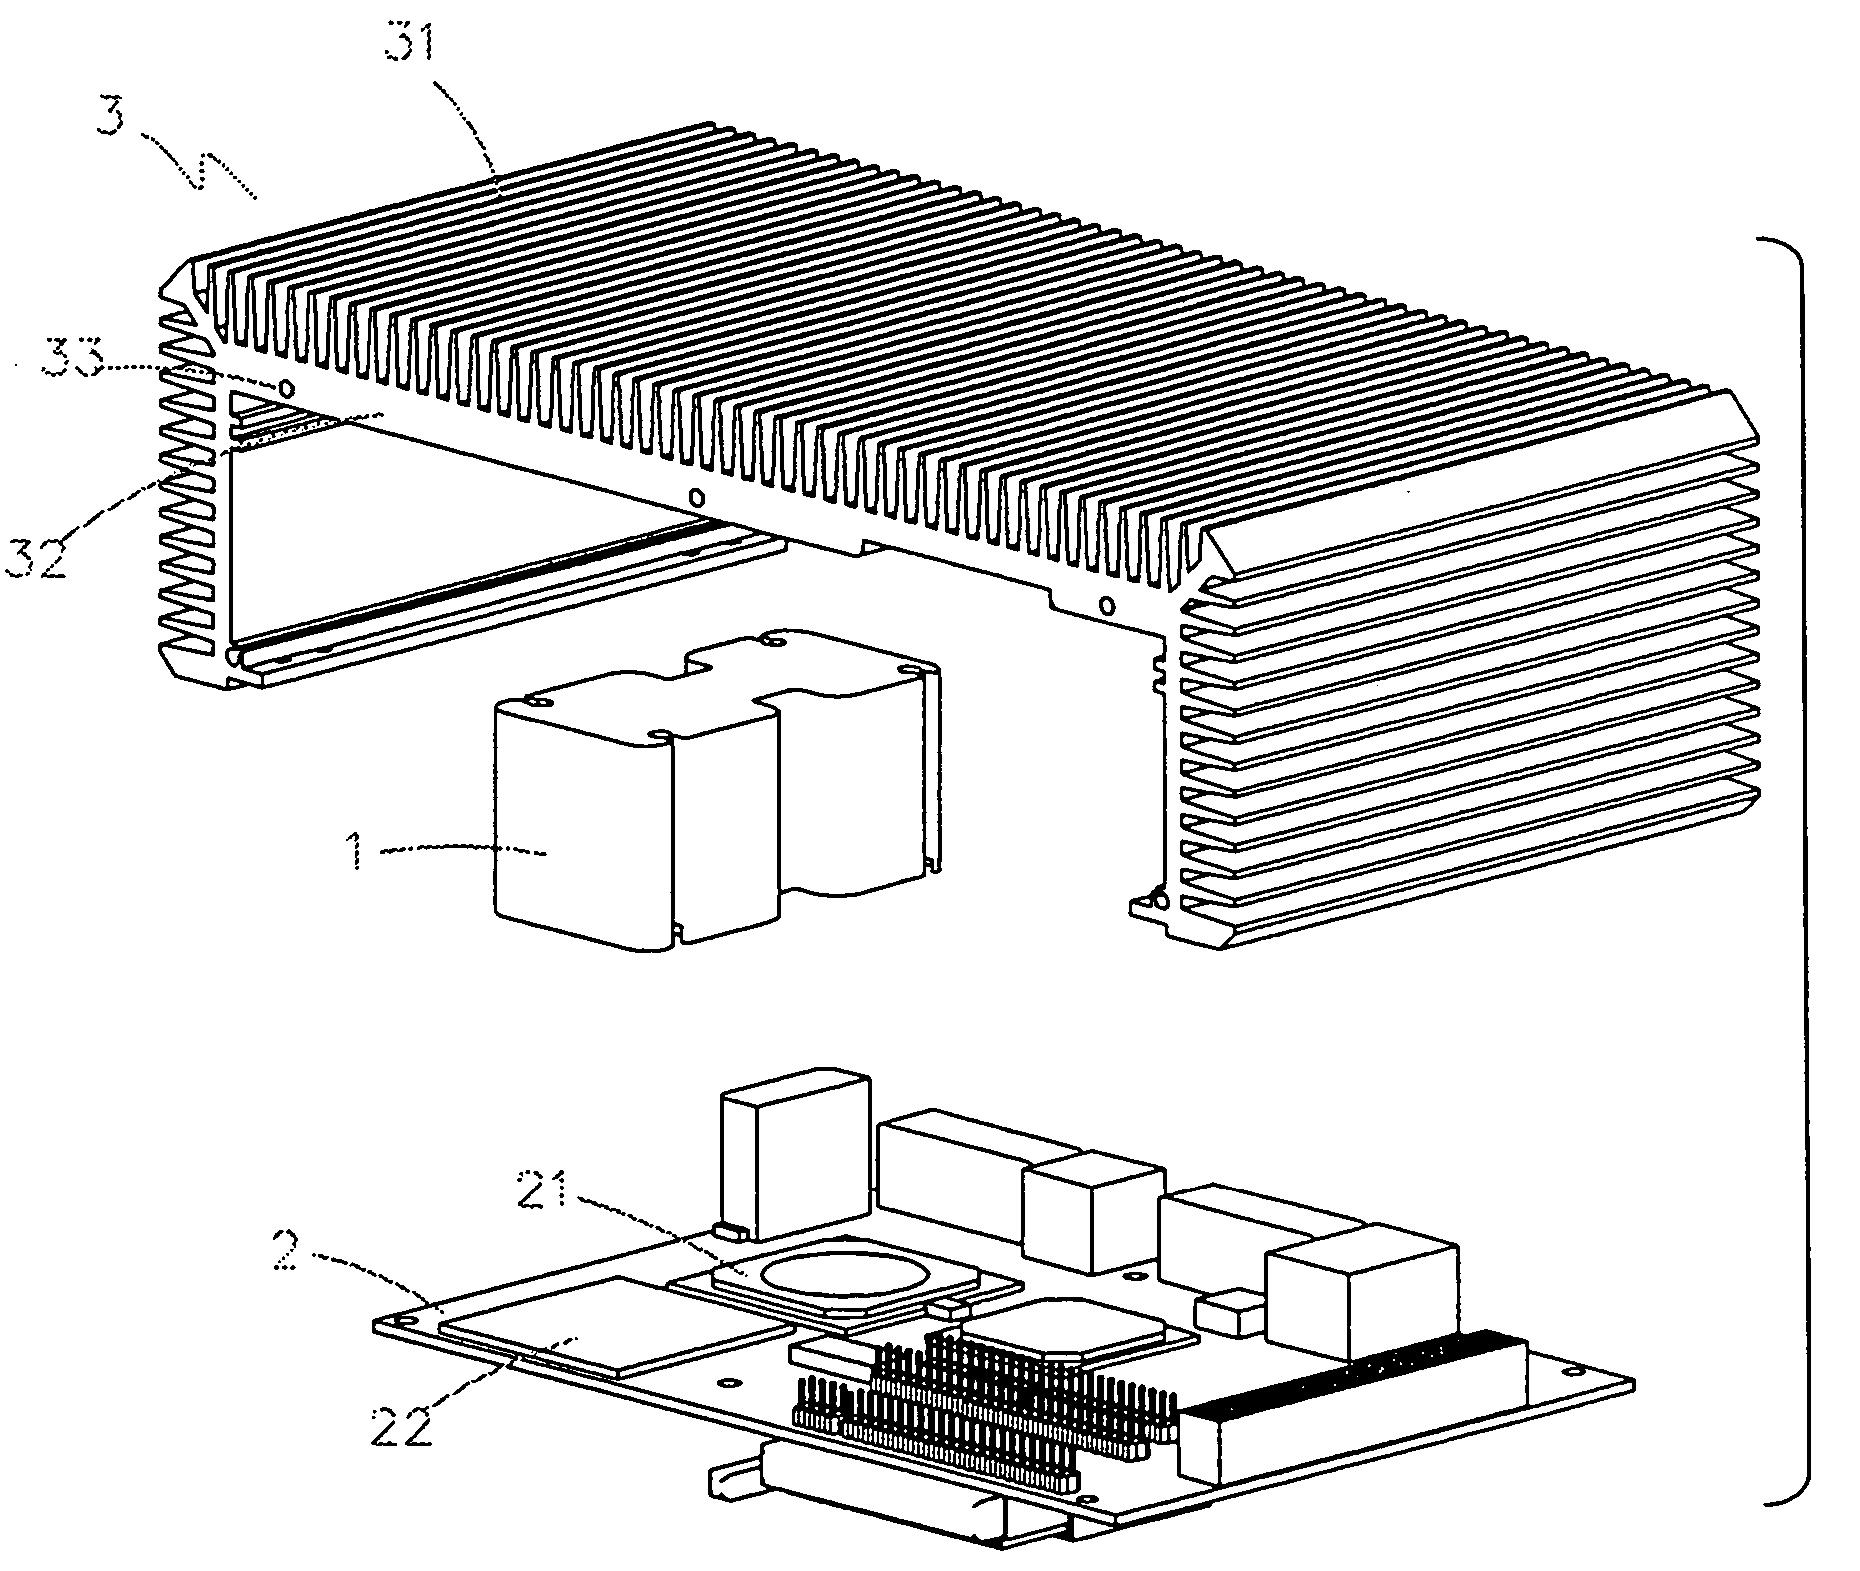 Industrial computer with aluminum case having fins as radiating device